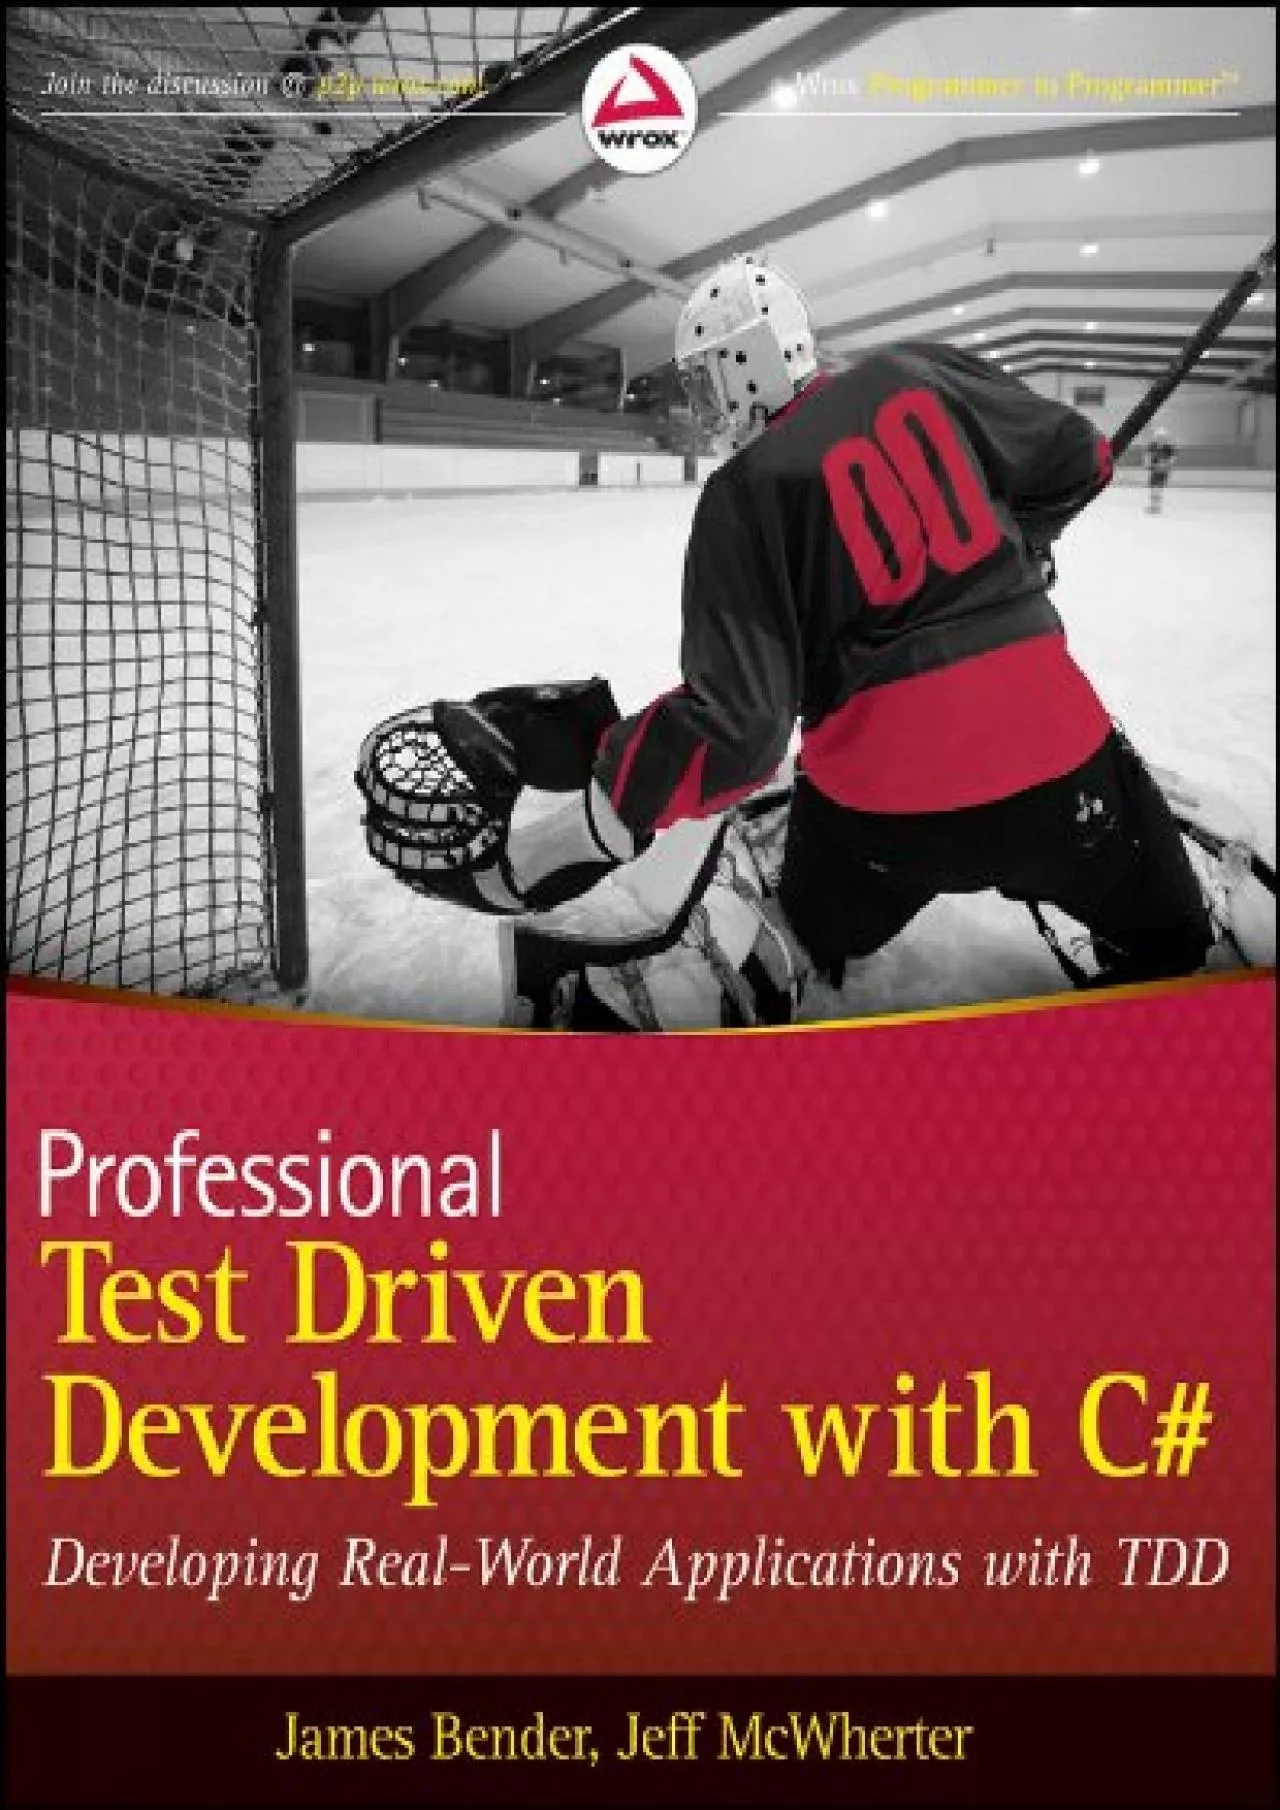 [READING BOOK]-Professional Test Driven Development with C: Developing Real World Applications